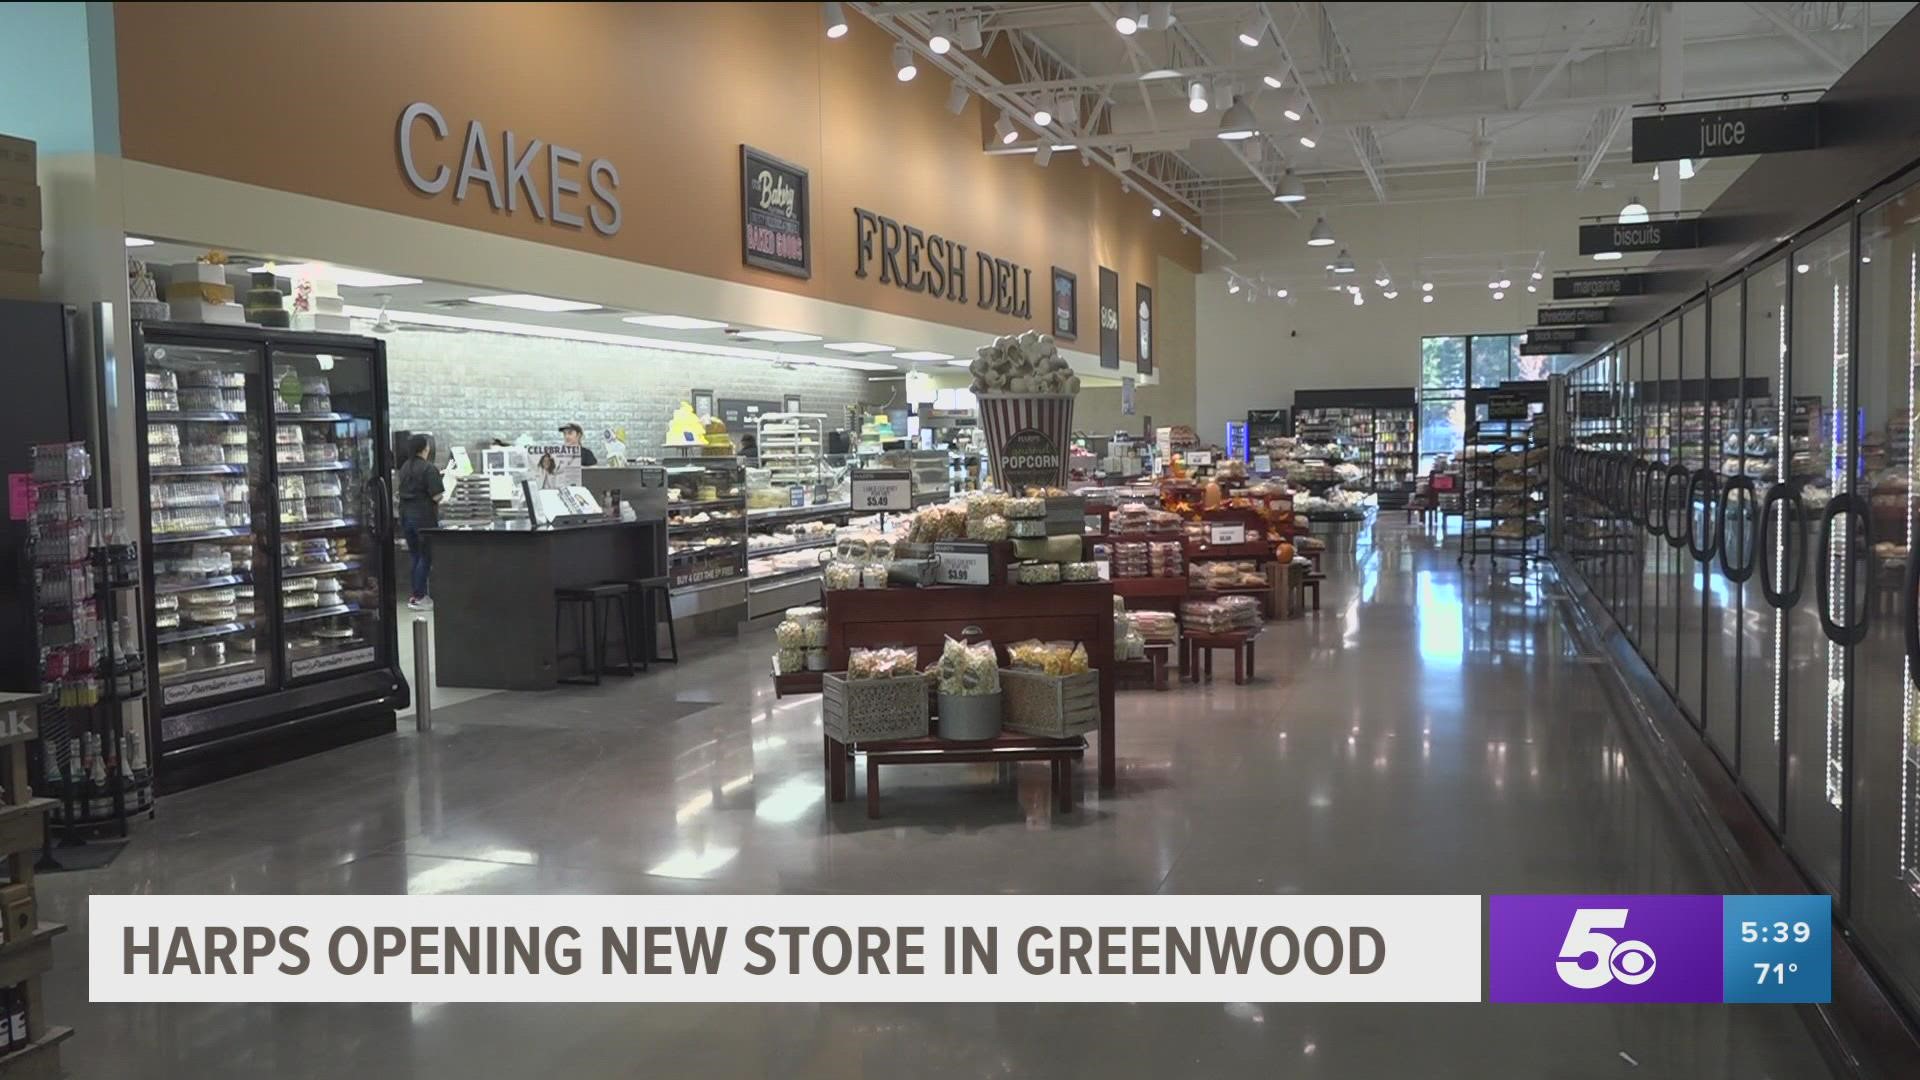 Sarah Thacker, Harps’ director of advertising and communications, said the 25,000-square-foot store will open with 18 part-time and 11 full-time employees.